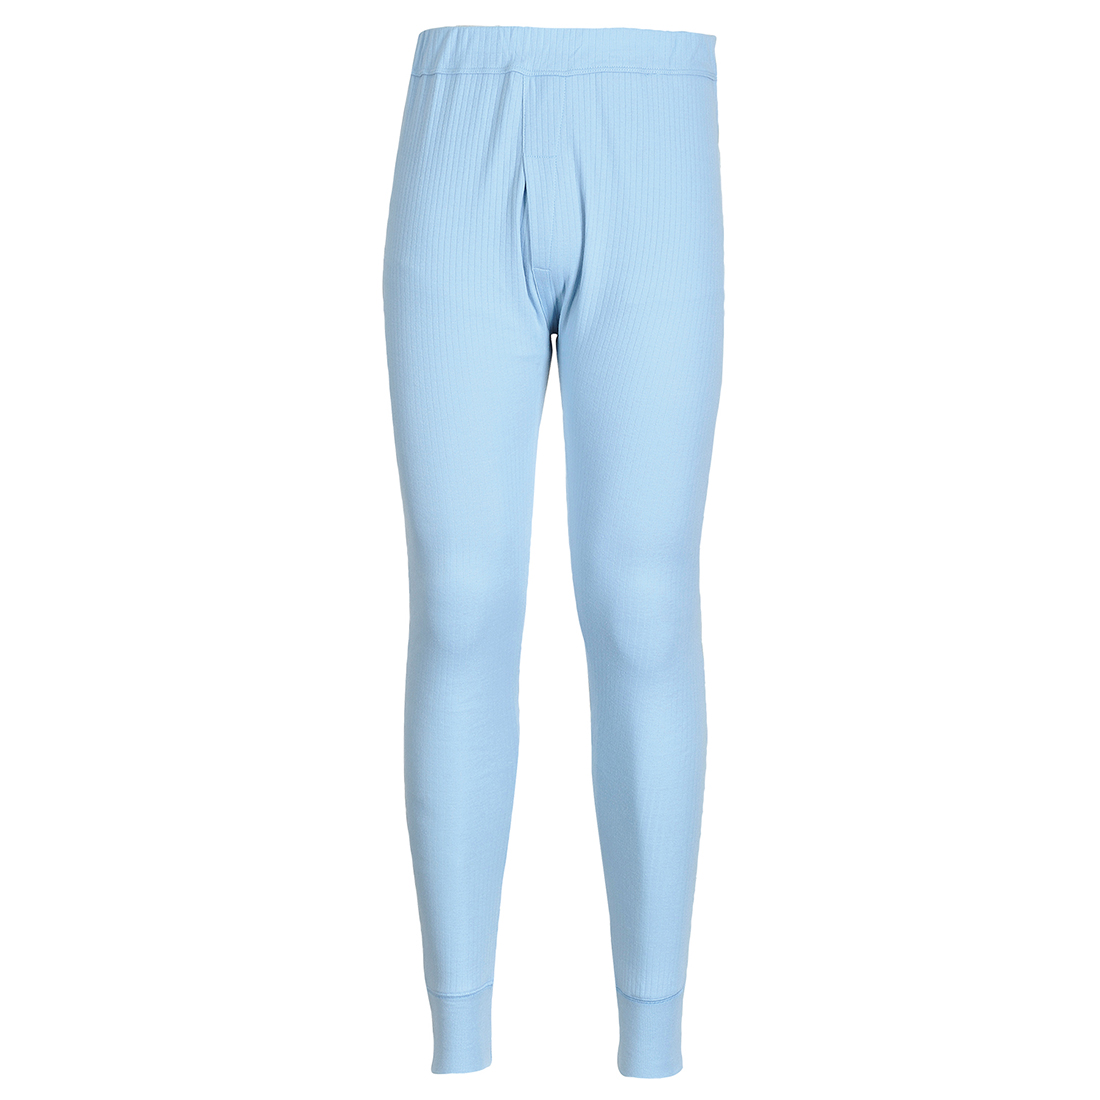 Thermal Trouser - Sky Blue